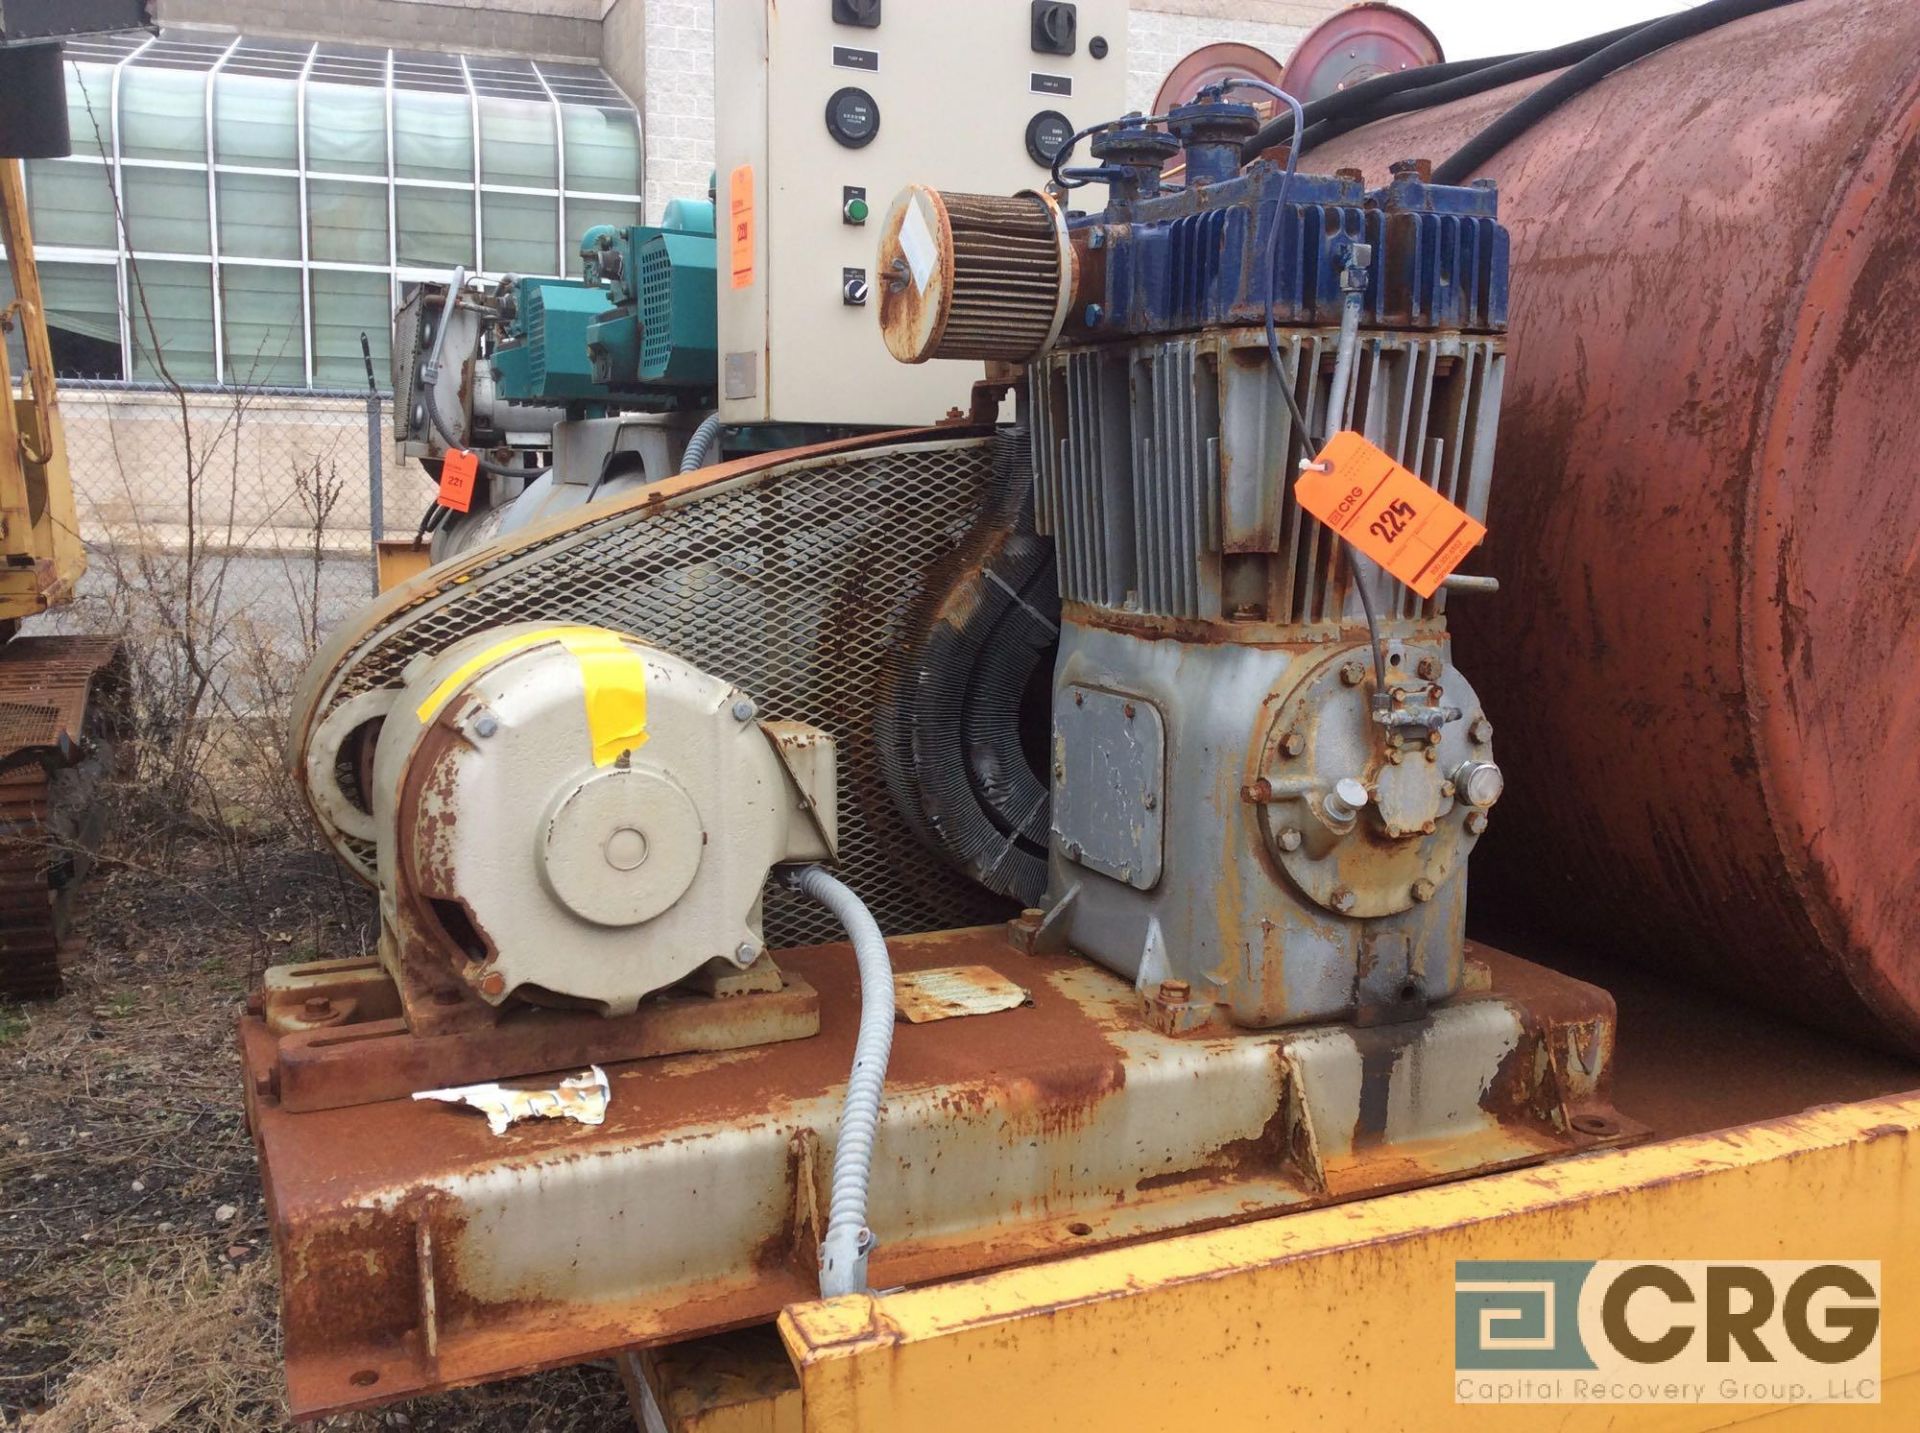 Quincy skid mounted compressor, mn 390-20, 15 hp motor (LOCATED GARFIELD ST)